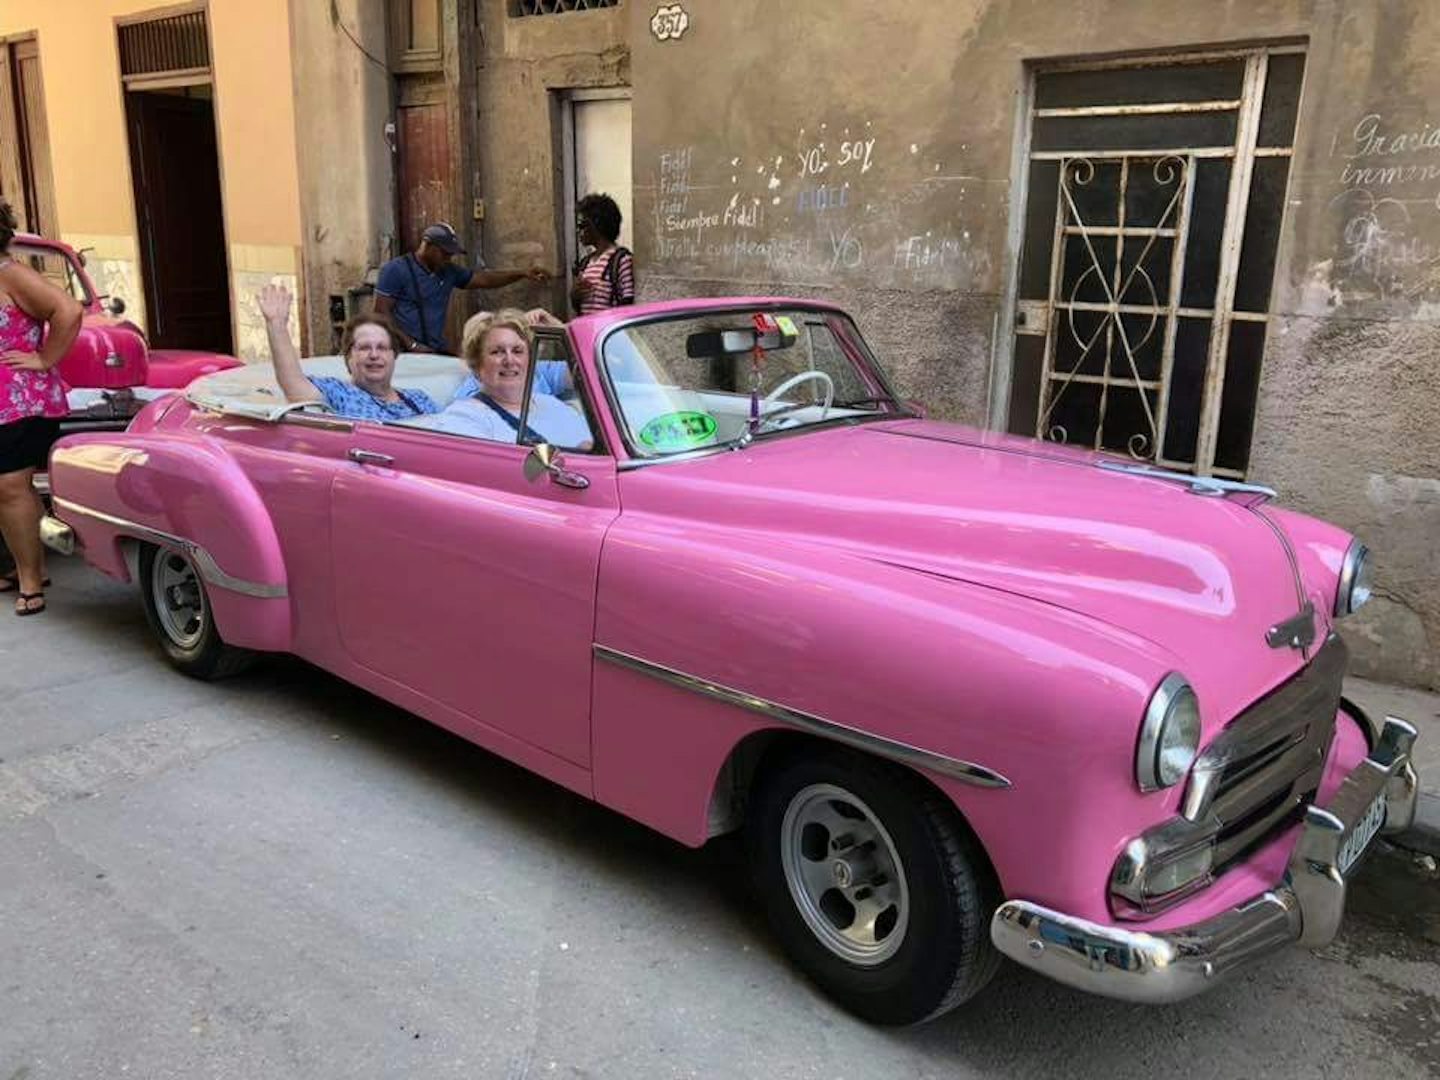 One of the 3 pink convertibles we had on our tour in Havana